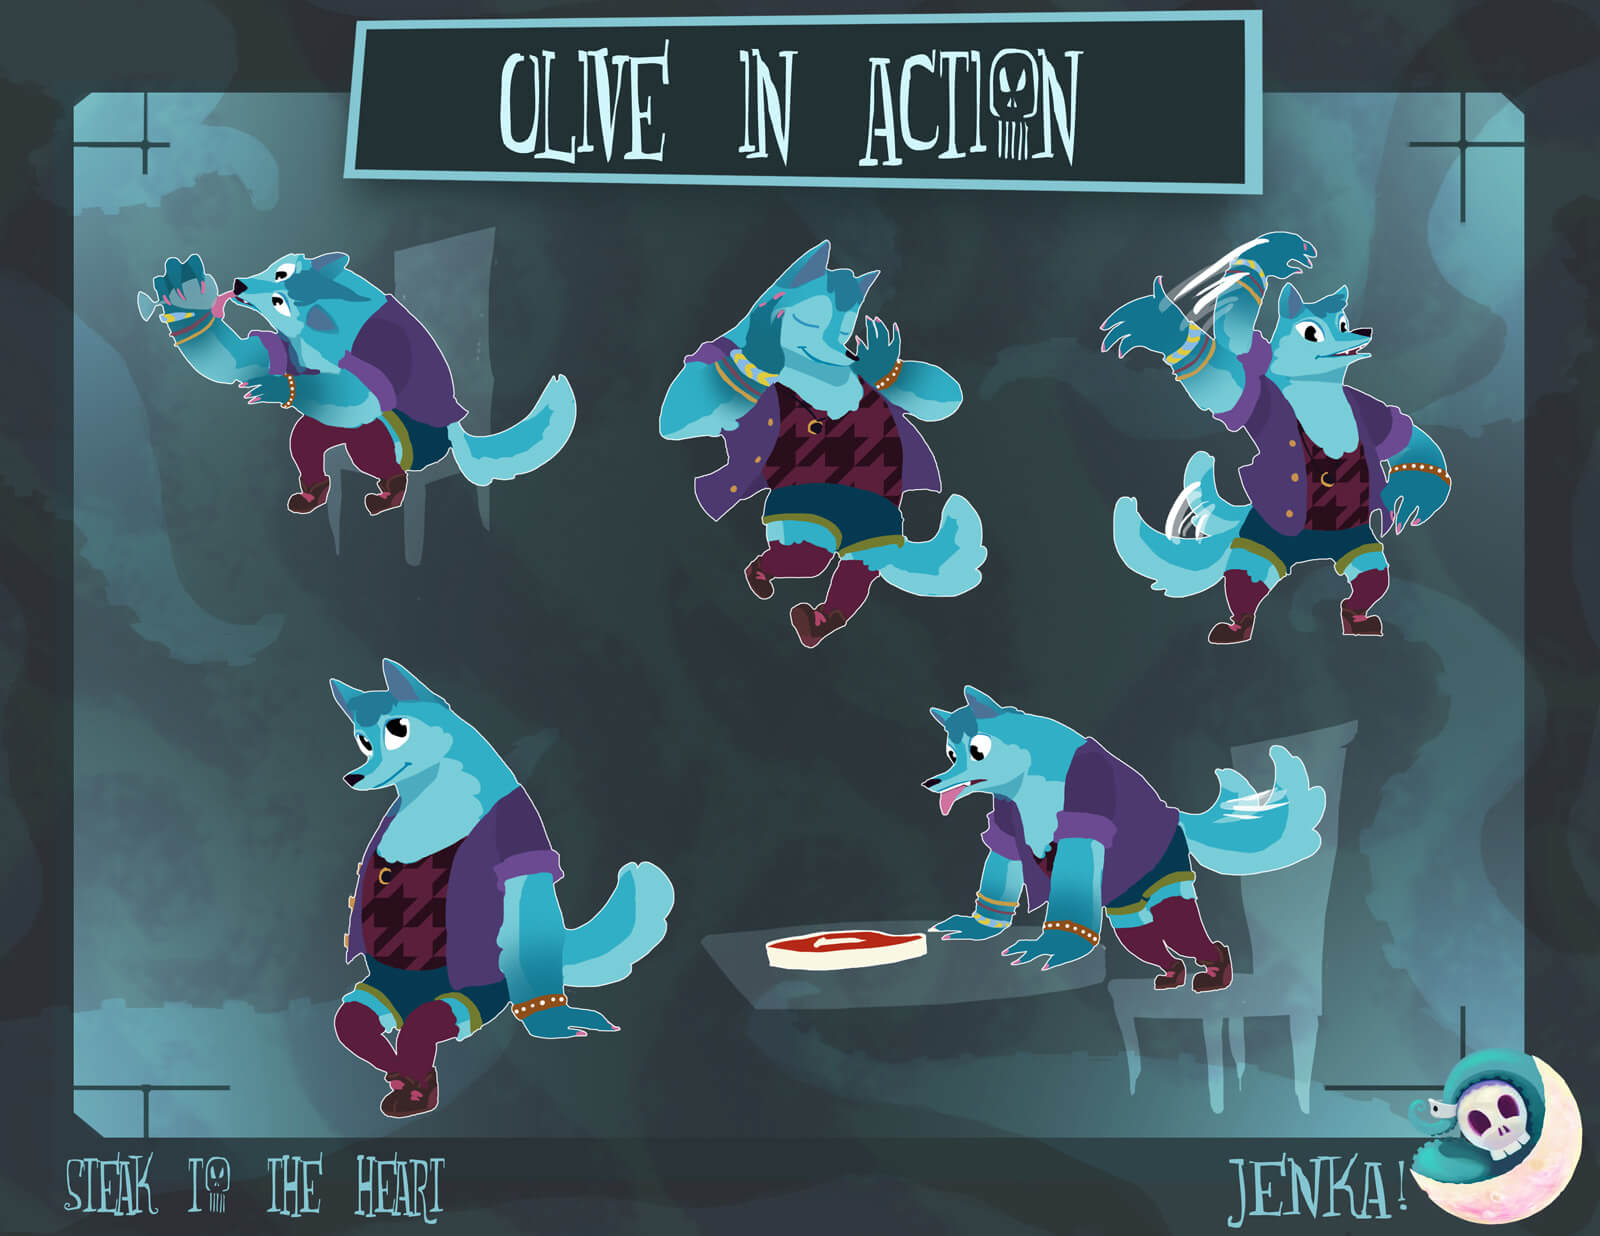 Designs of a blue werewolf in various action poses, such as waving, sitting, licking a cup, and panting